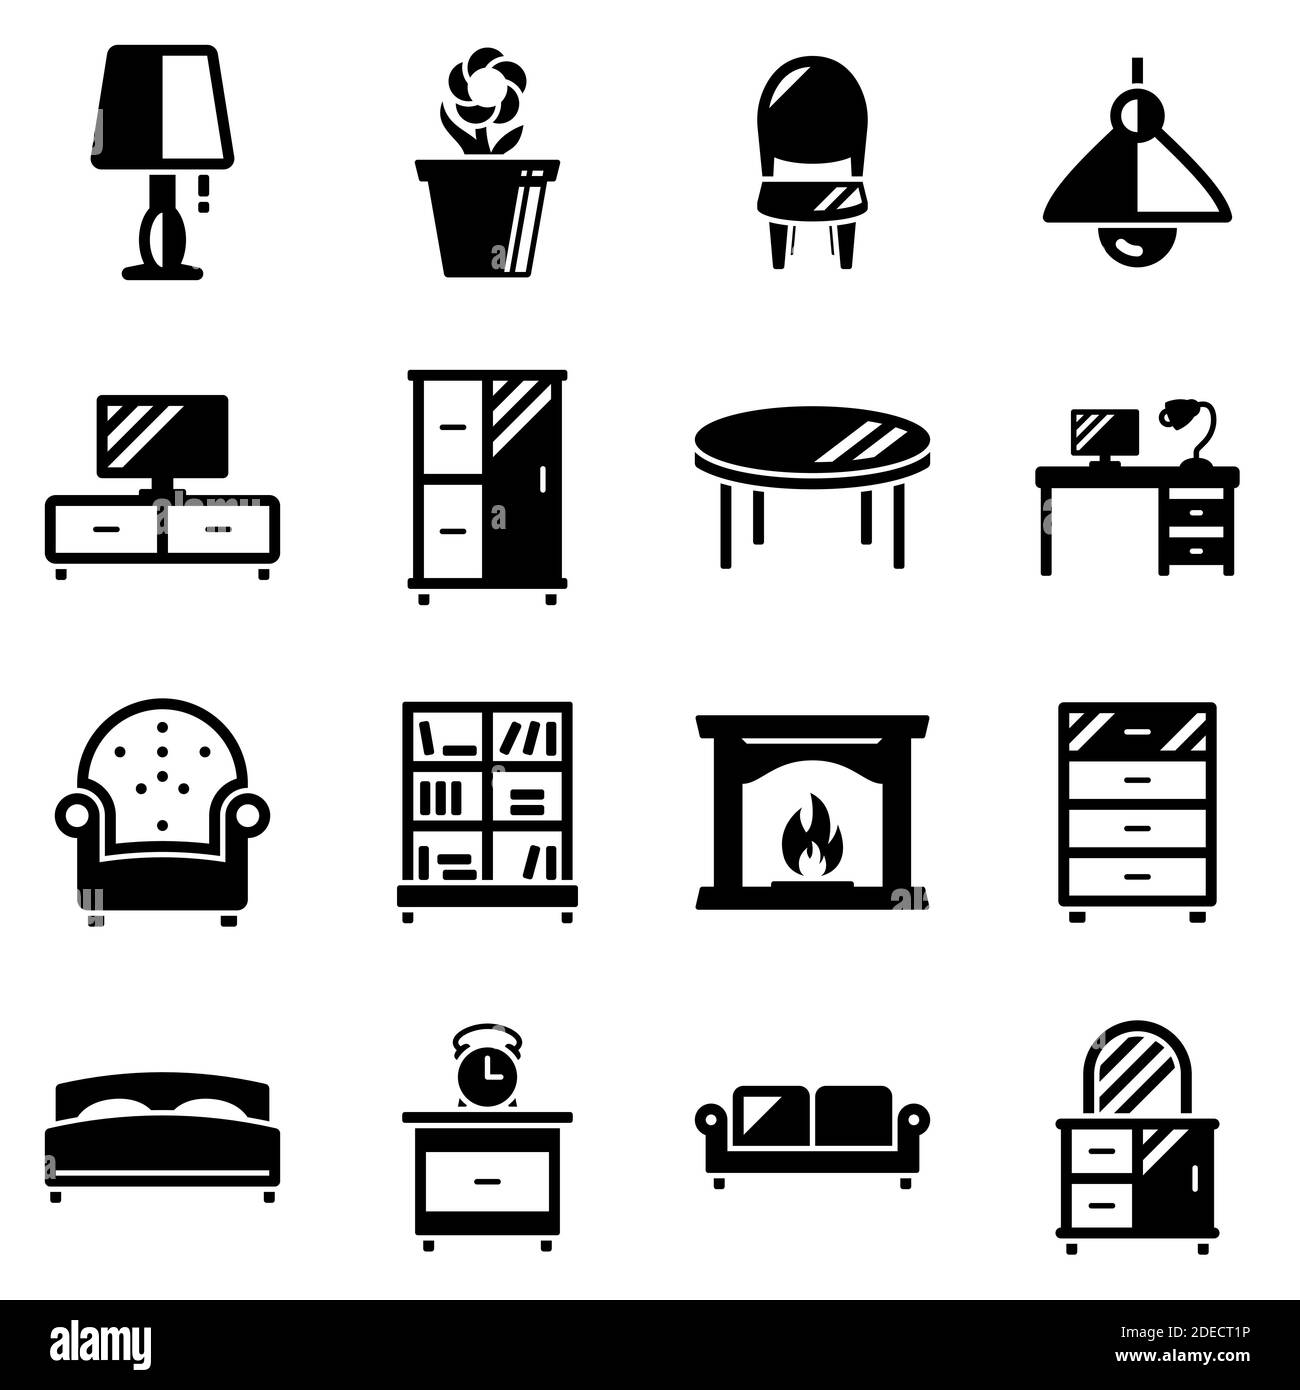 Set of simple icons on a theme Furniture, house, interior, vector, design, flat, sign, symbol, object, illustration. Black icons isolated against whit Stock Vector